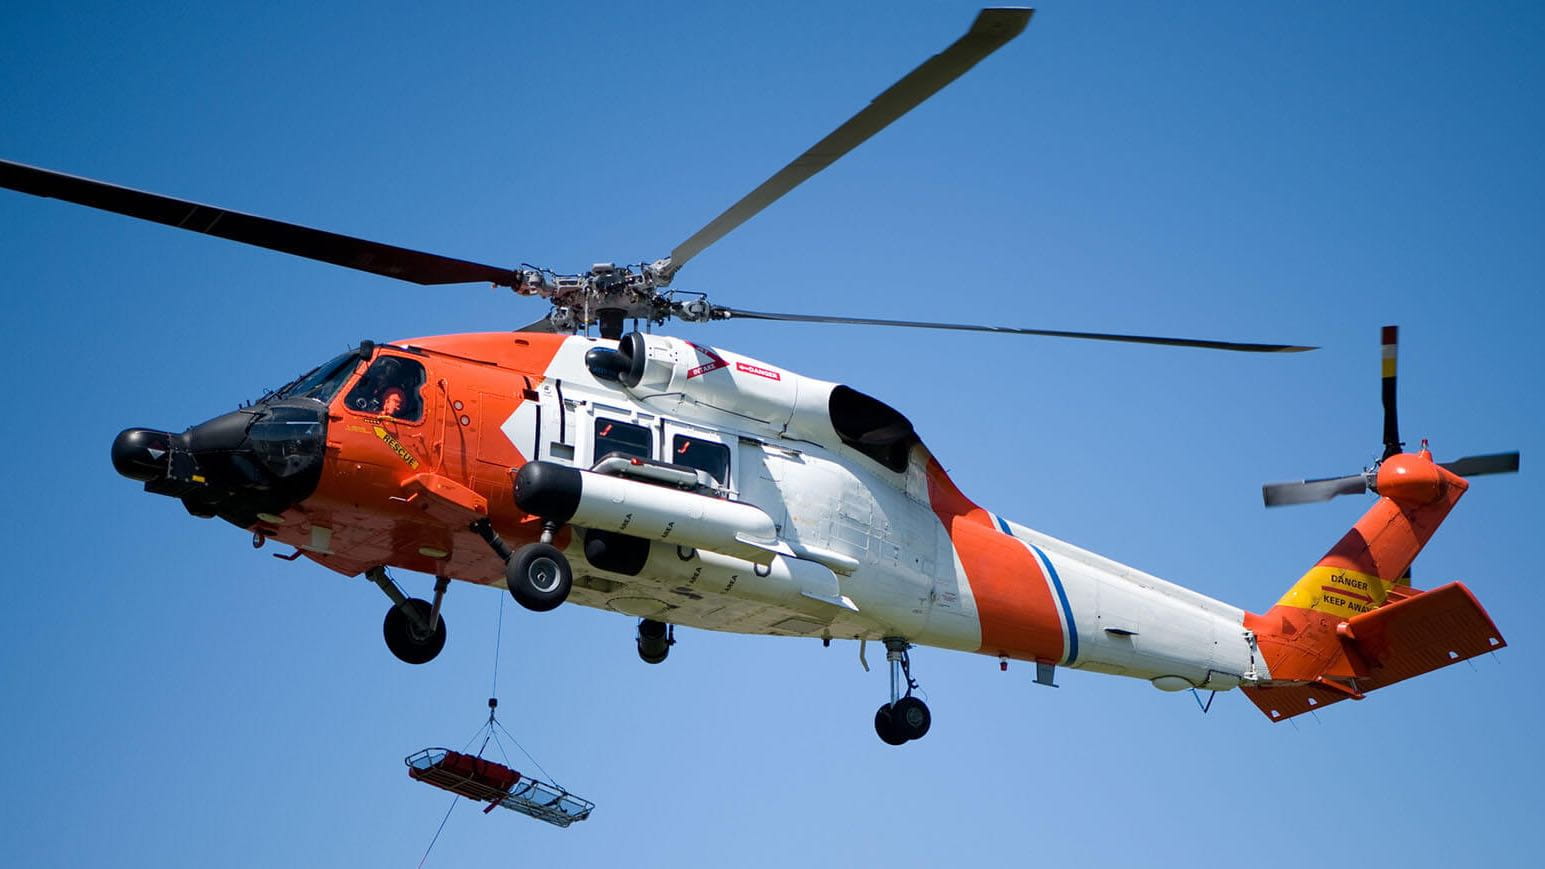 helicopter rescue hoist in use in flight